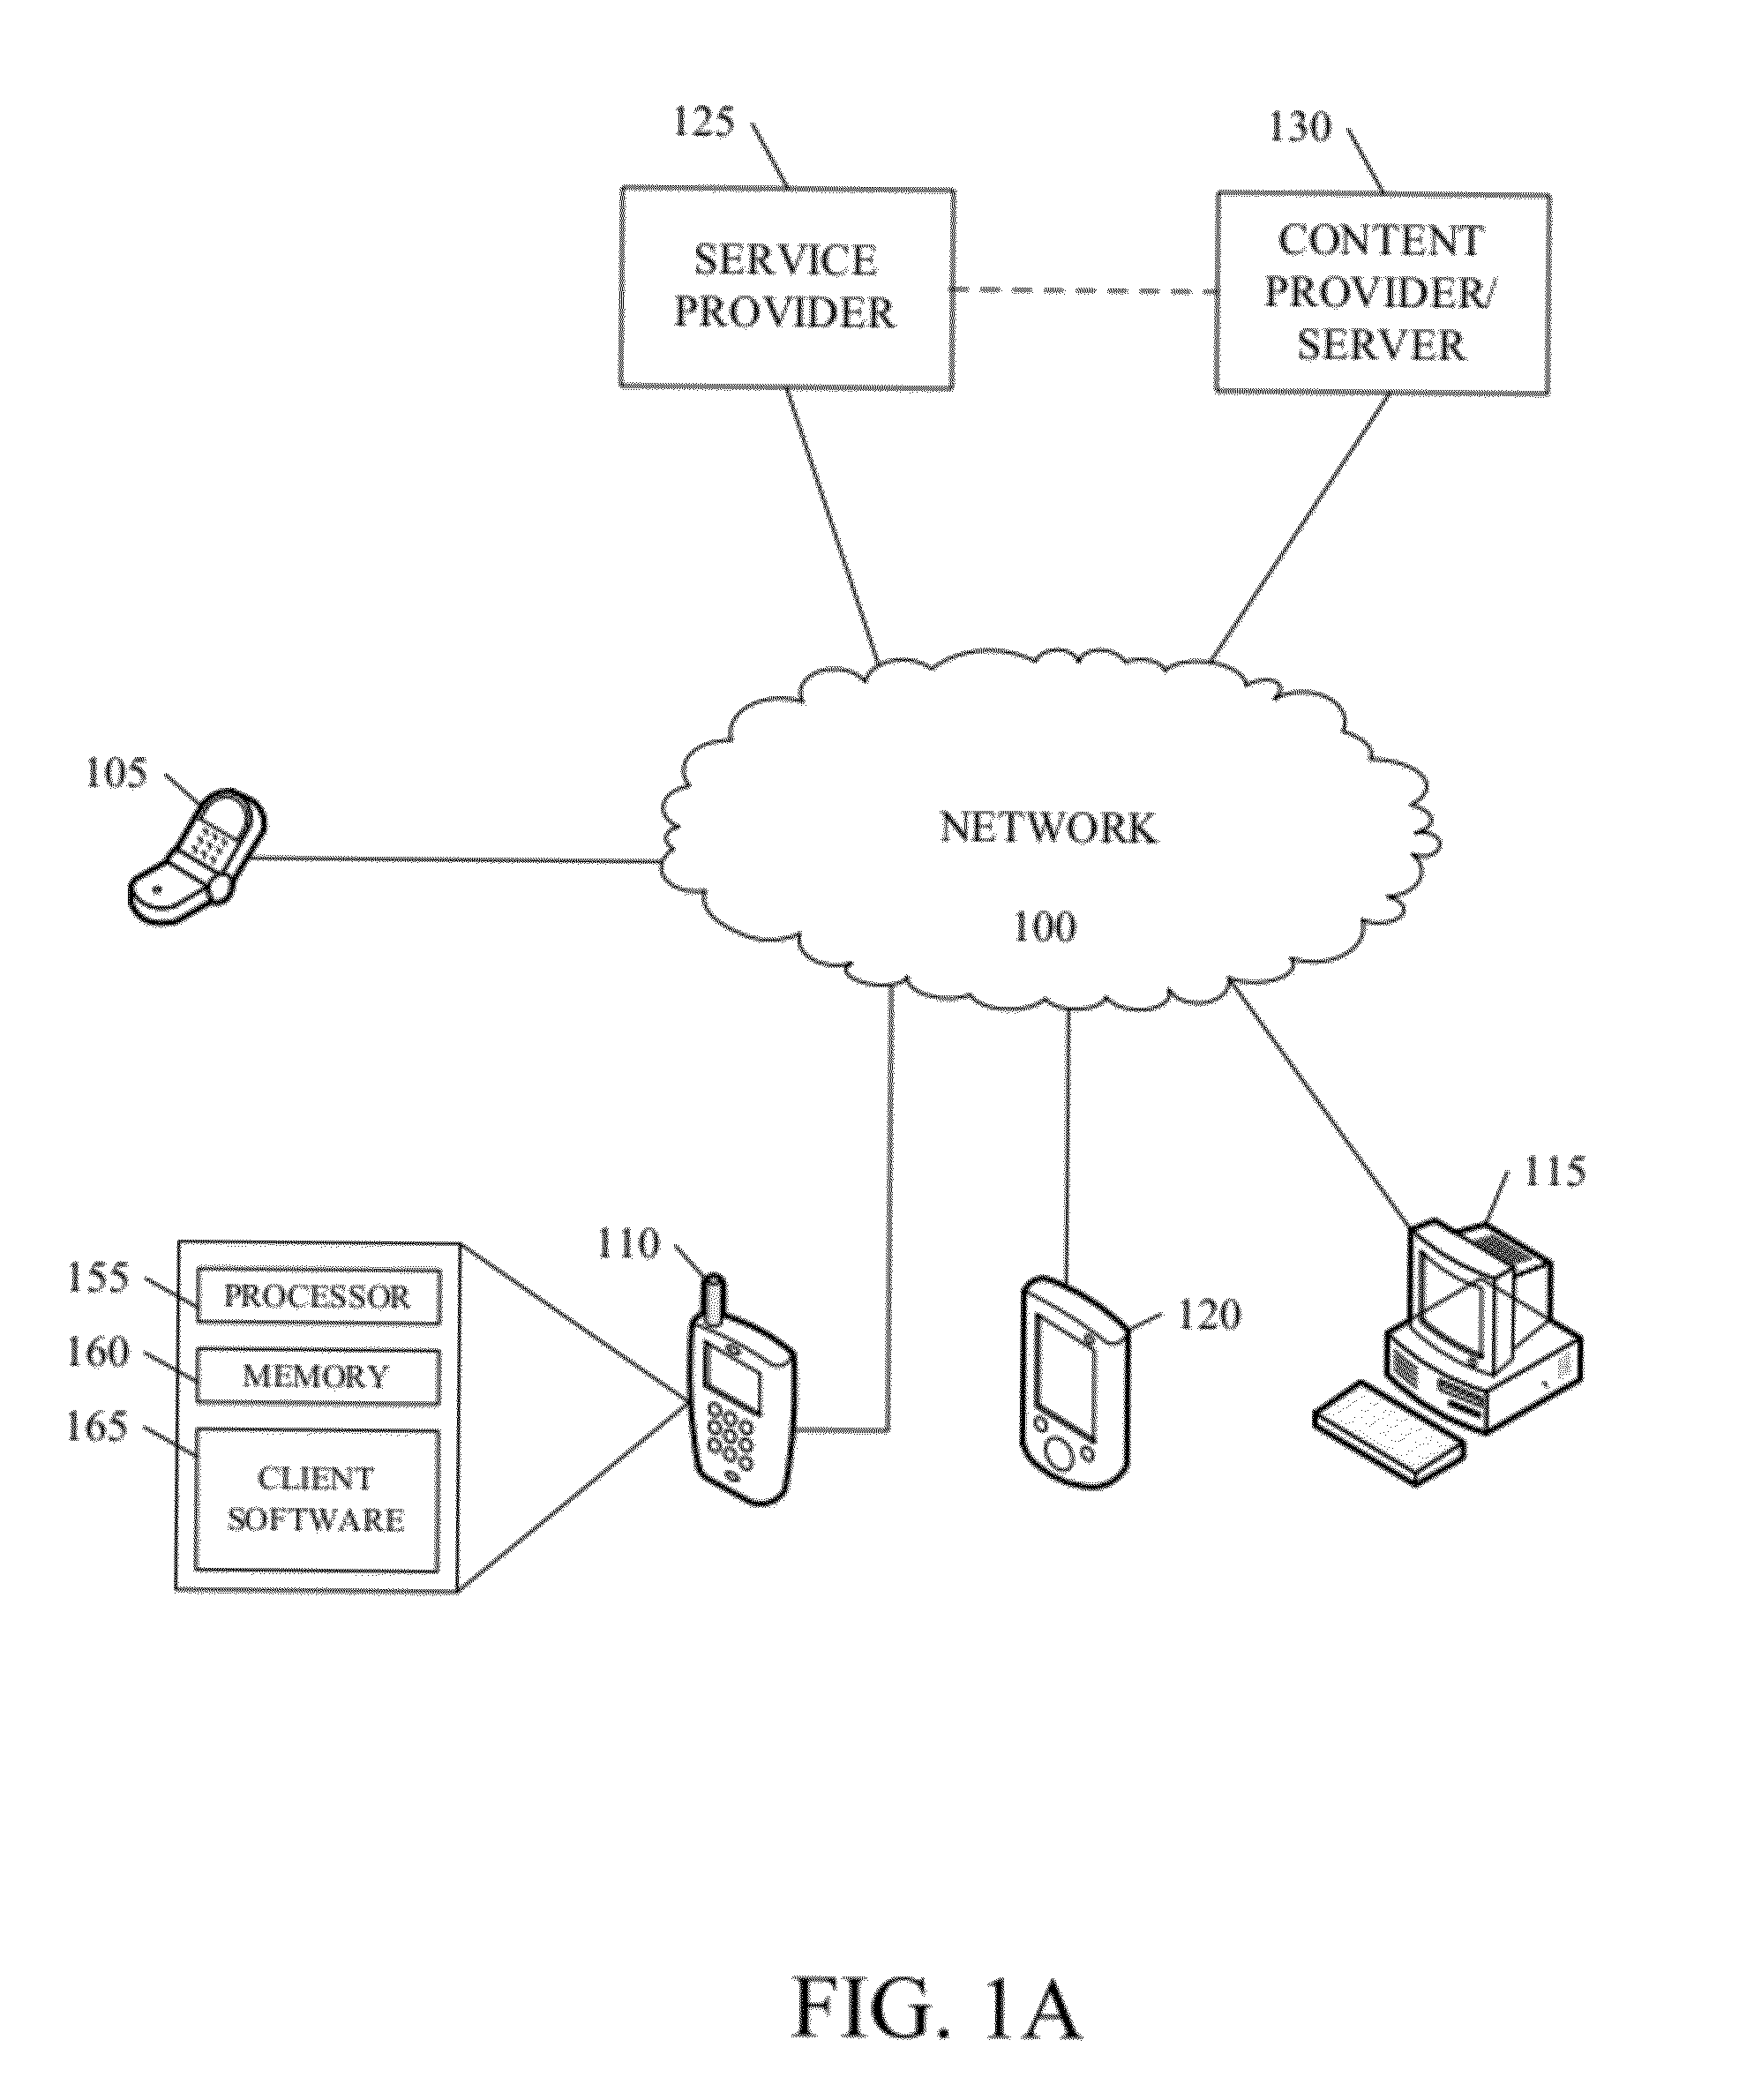 Providing signaling information in an electronic service guide